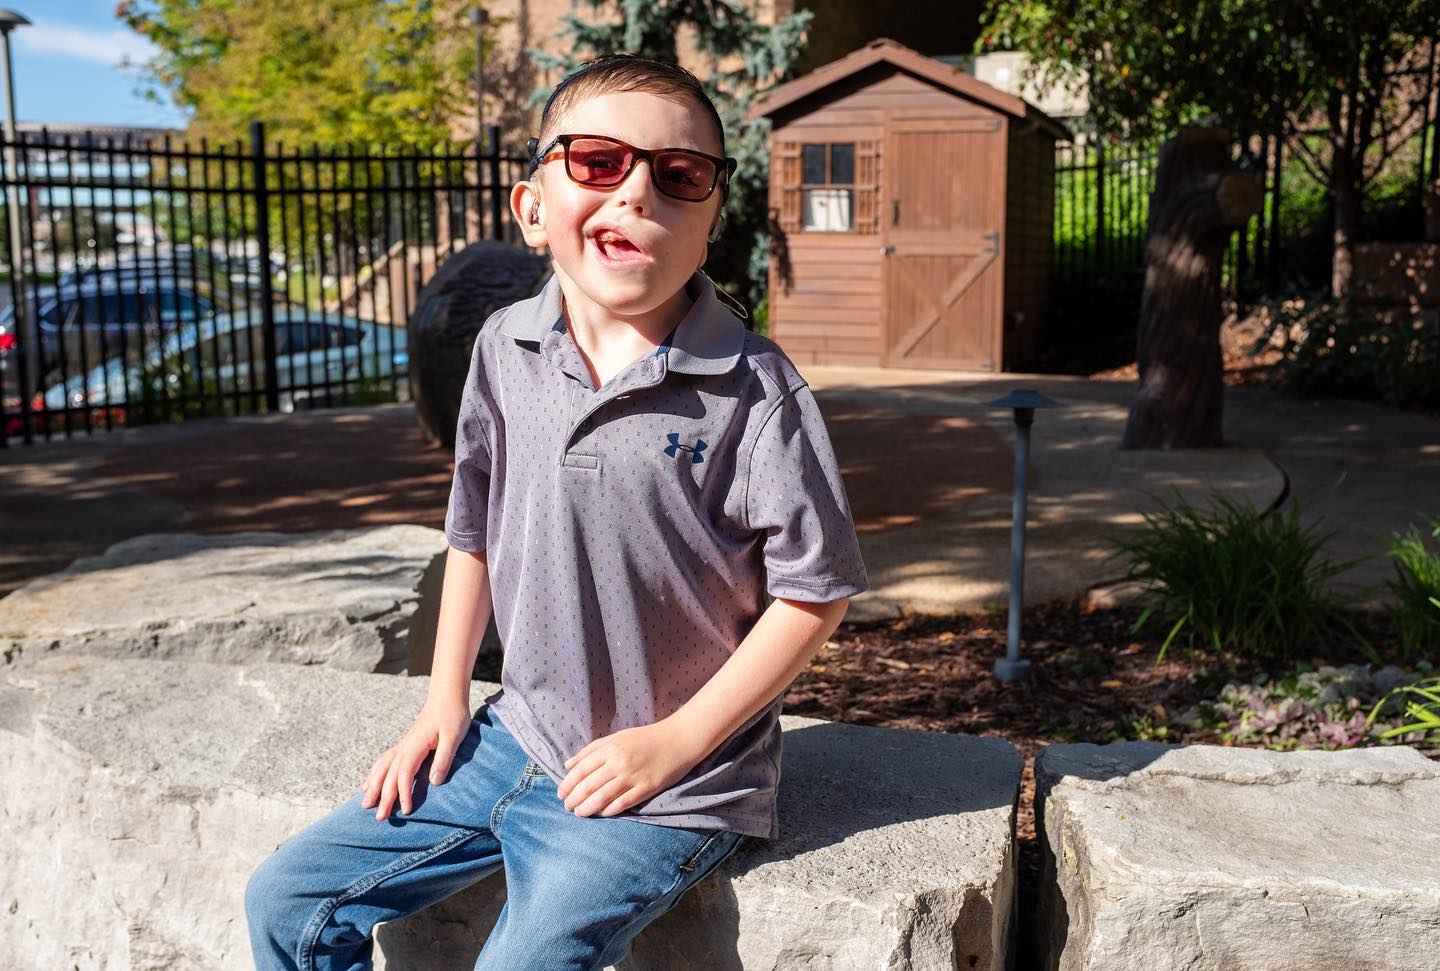 PHOTO: Gillette Children's Specialty Healthcare made a custom glasses system for a young Minnesota boy who was born with microtia.